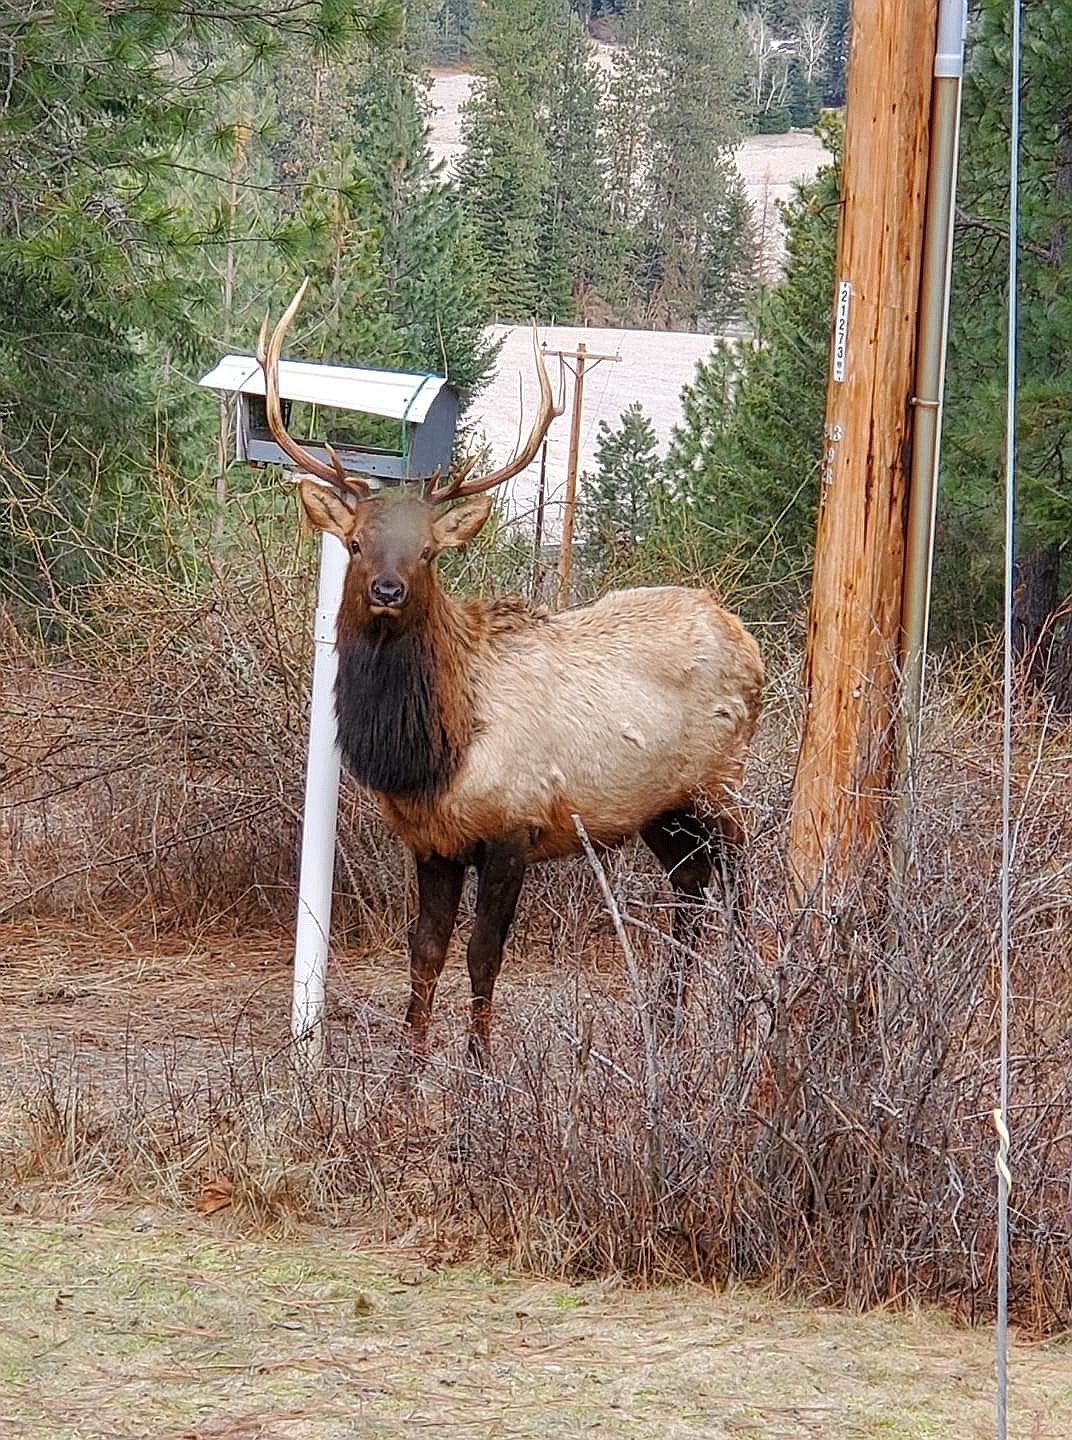 "This bull enjoyed the seed in our bird feeder." (photo by  Elena Nelson)